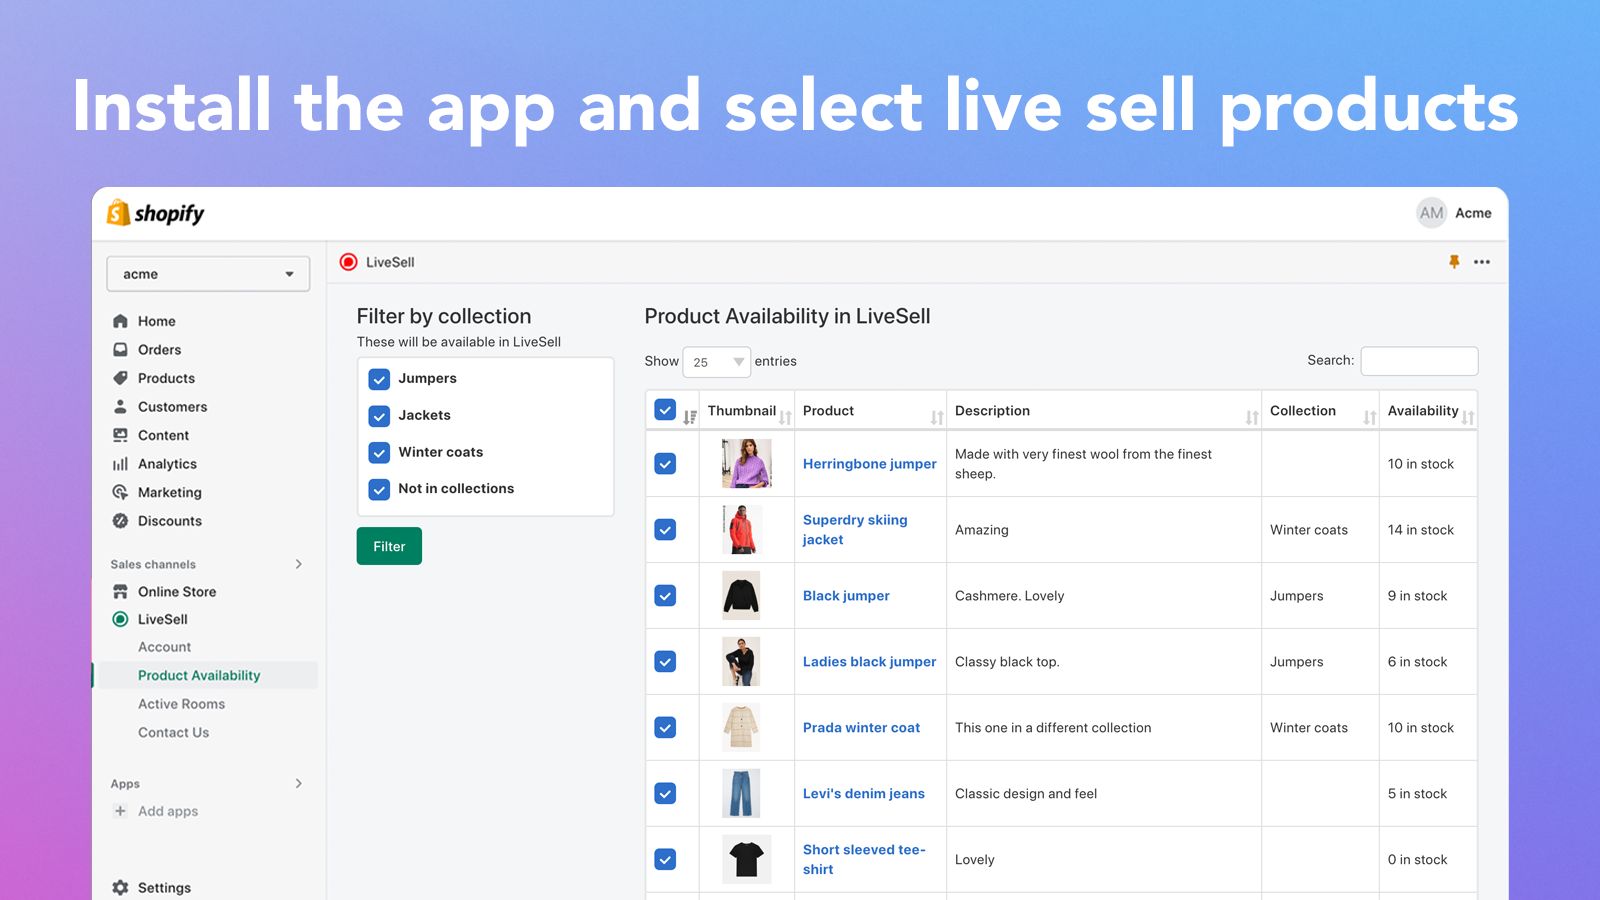 Install the app and select the products you want to sell live